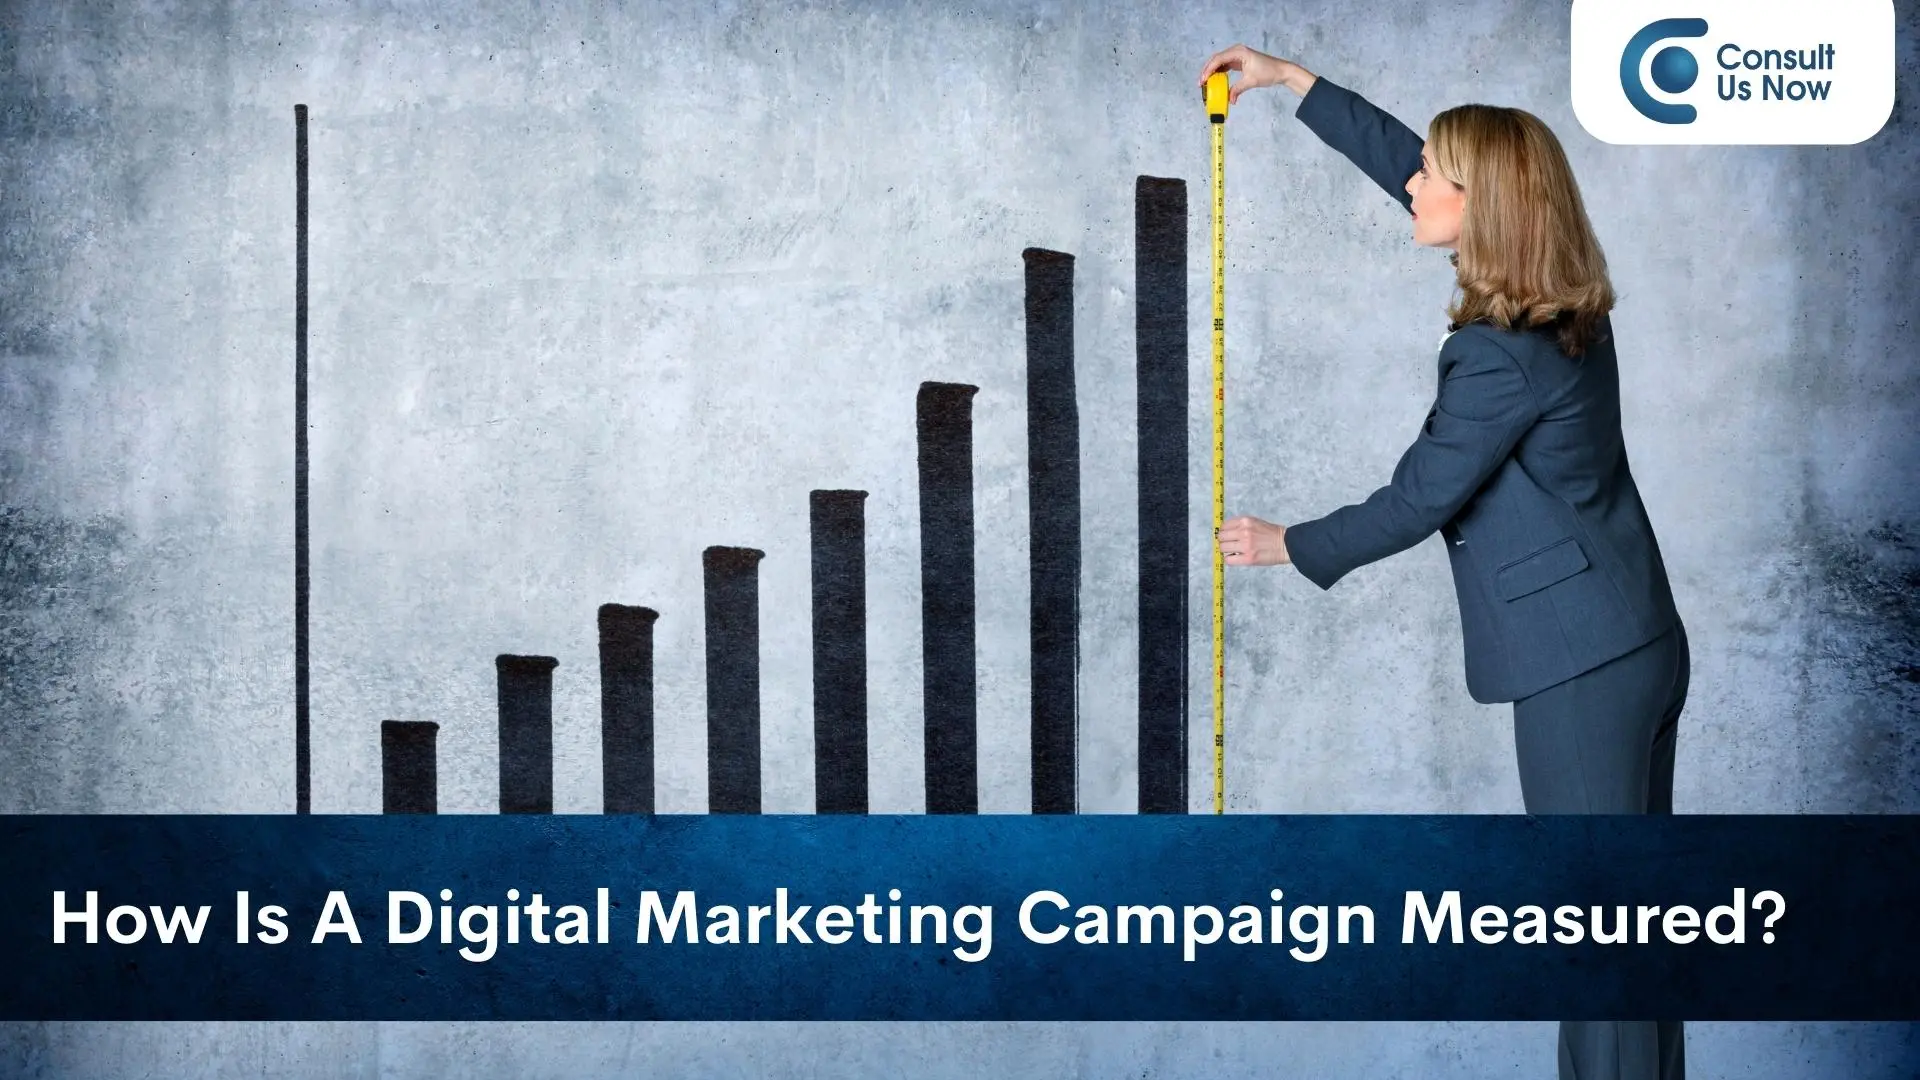 How is a Digital Marketing Campaign Measured?